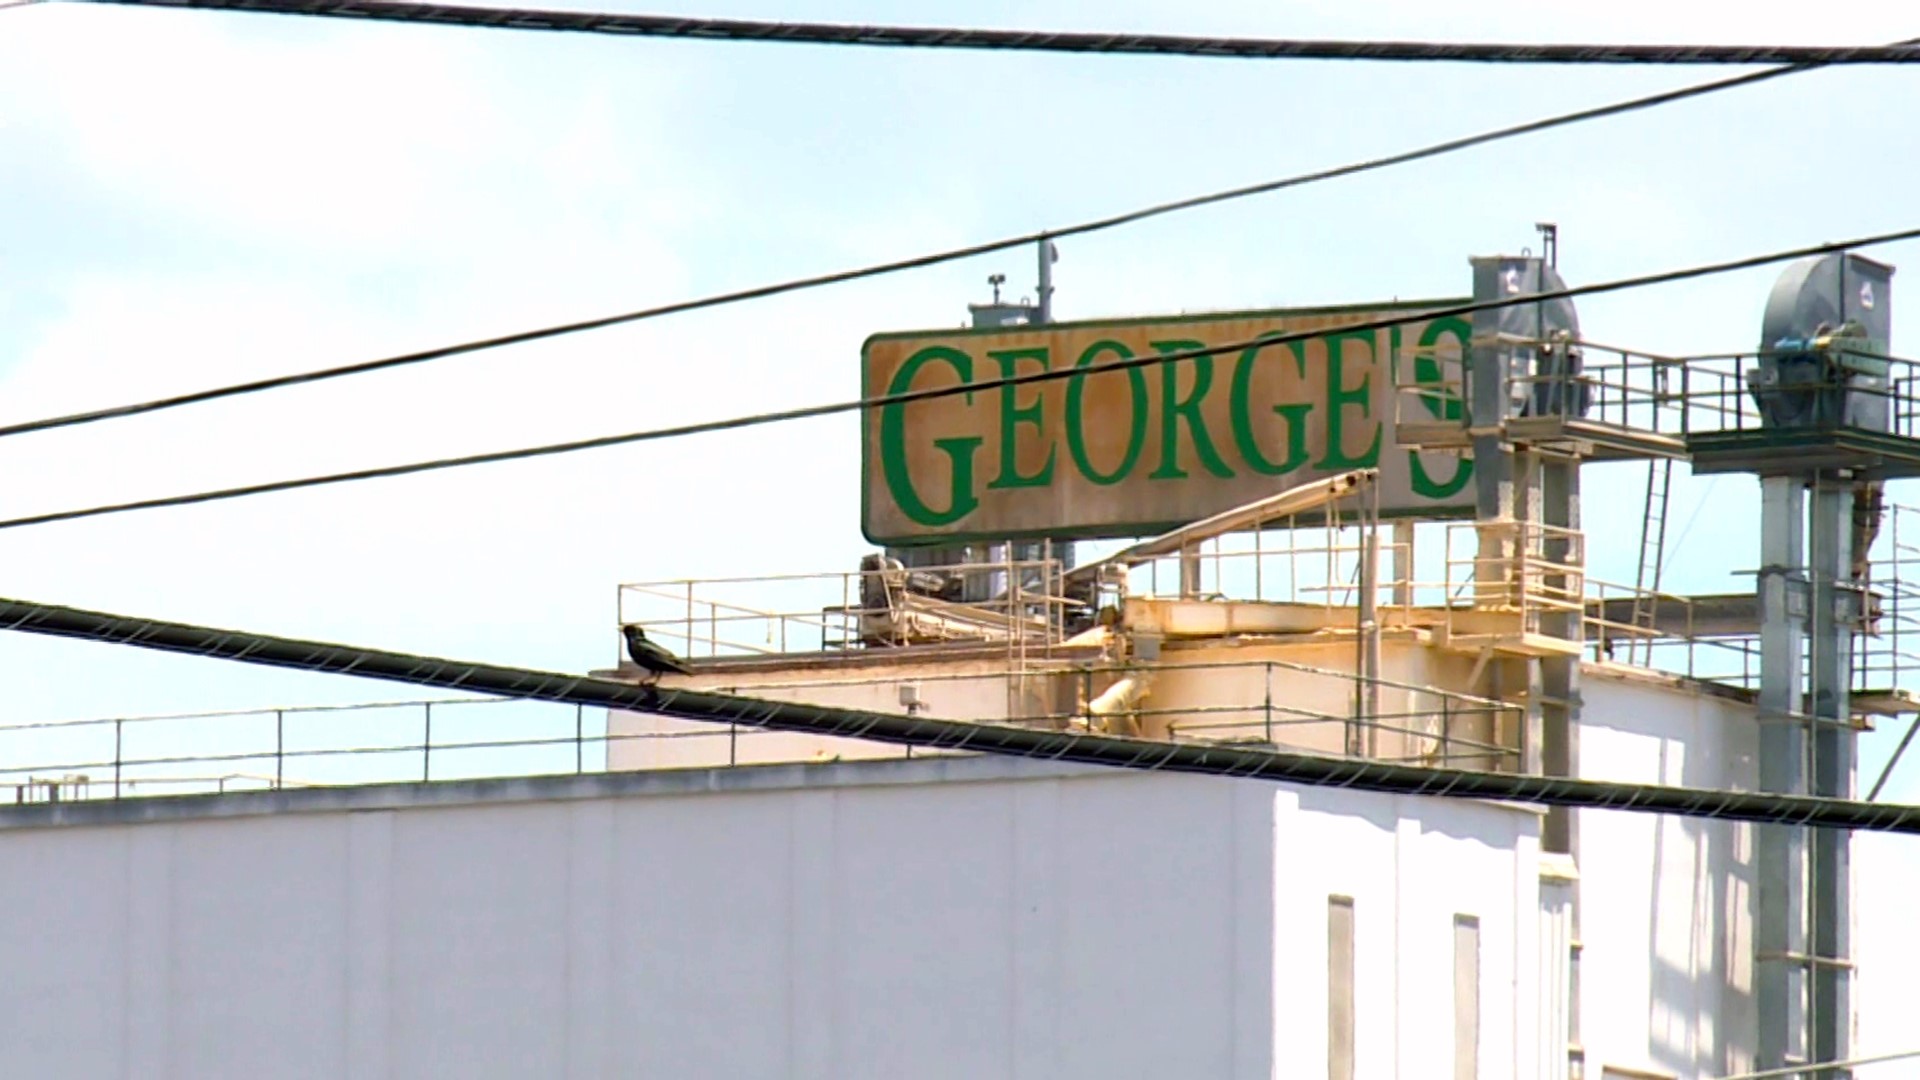 George's allegedly conspired with other companies to suppress wages.